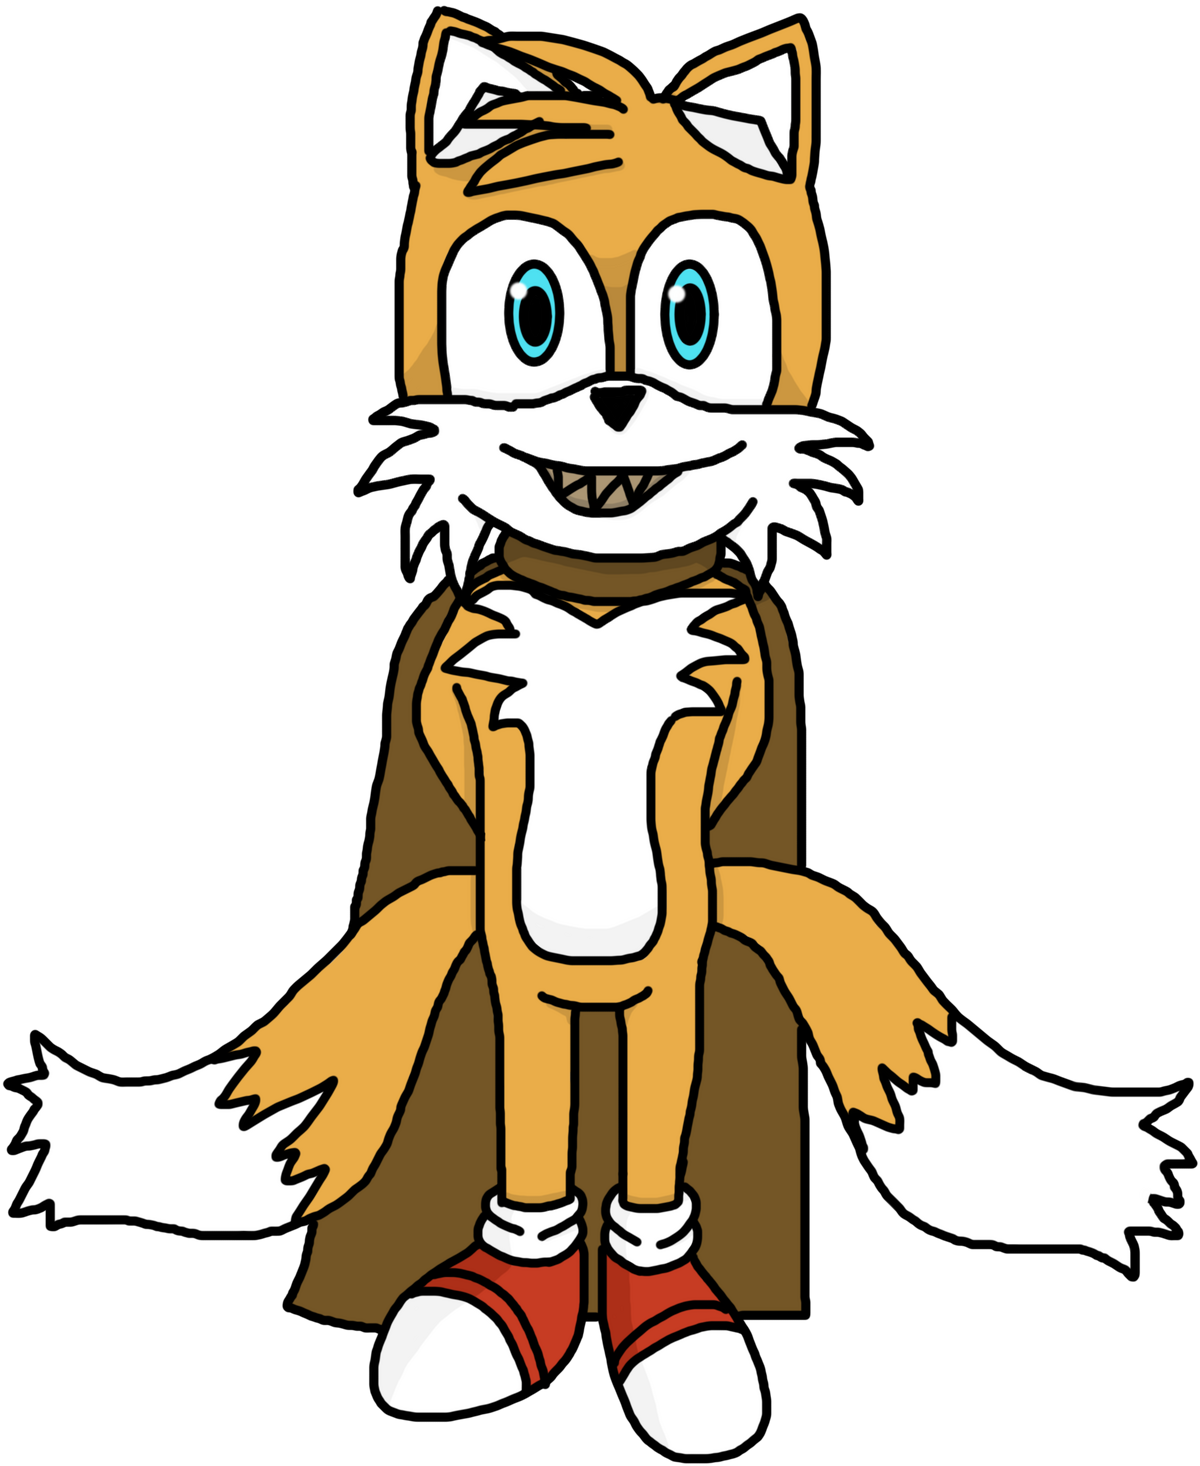 32 Tails.exe ideas  tails doll, sonic art, sonic